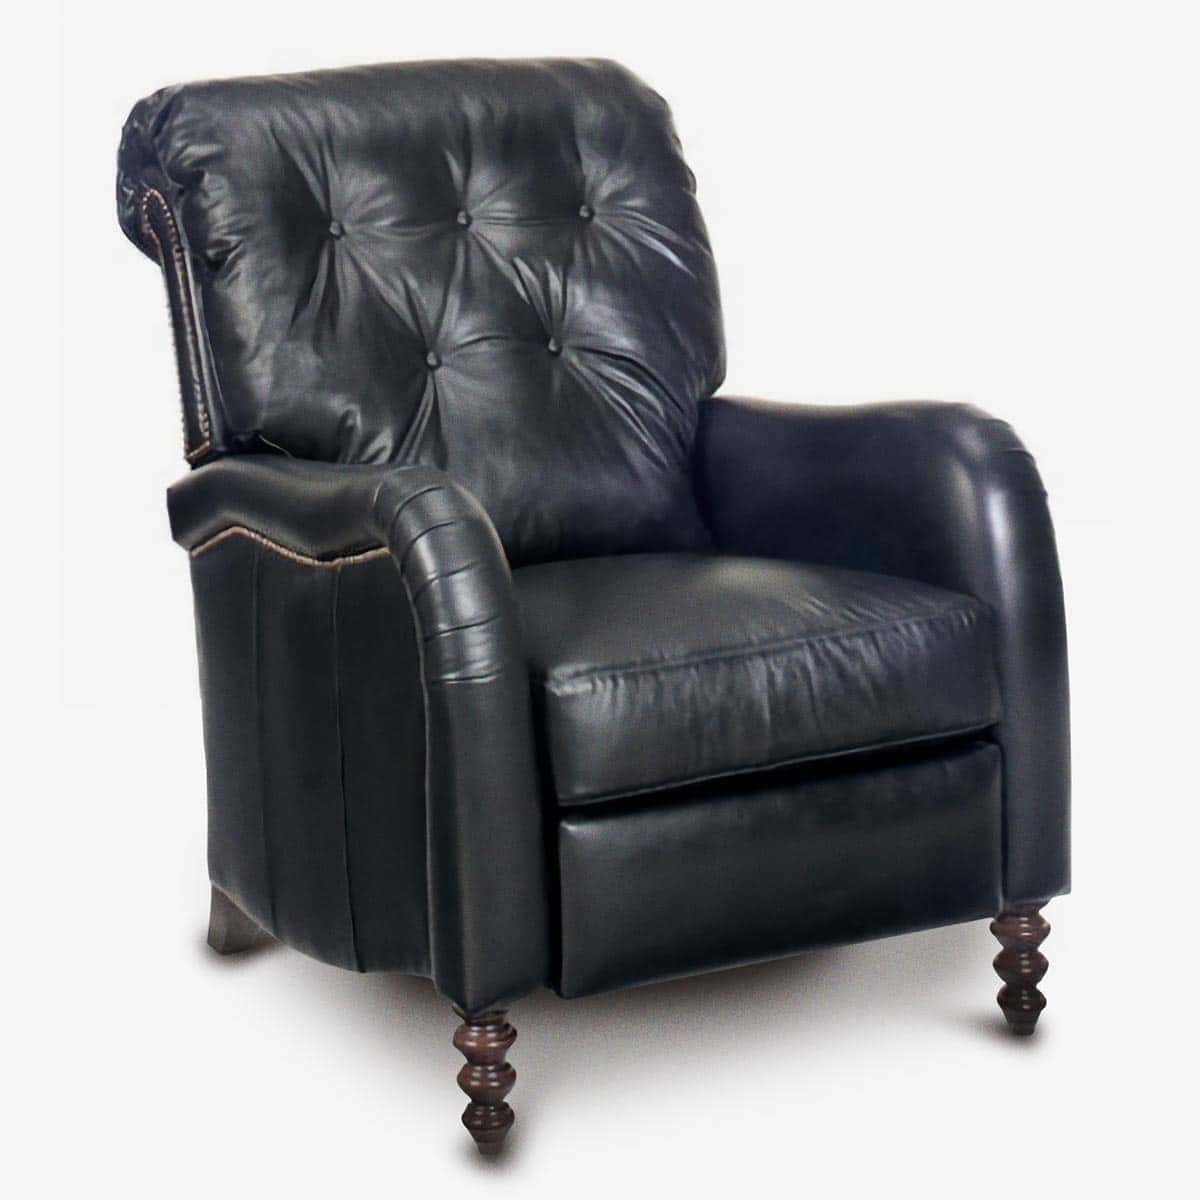 The Charlie: American Made Recliner